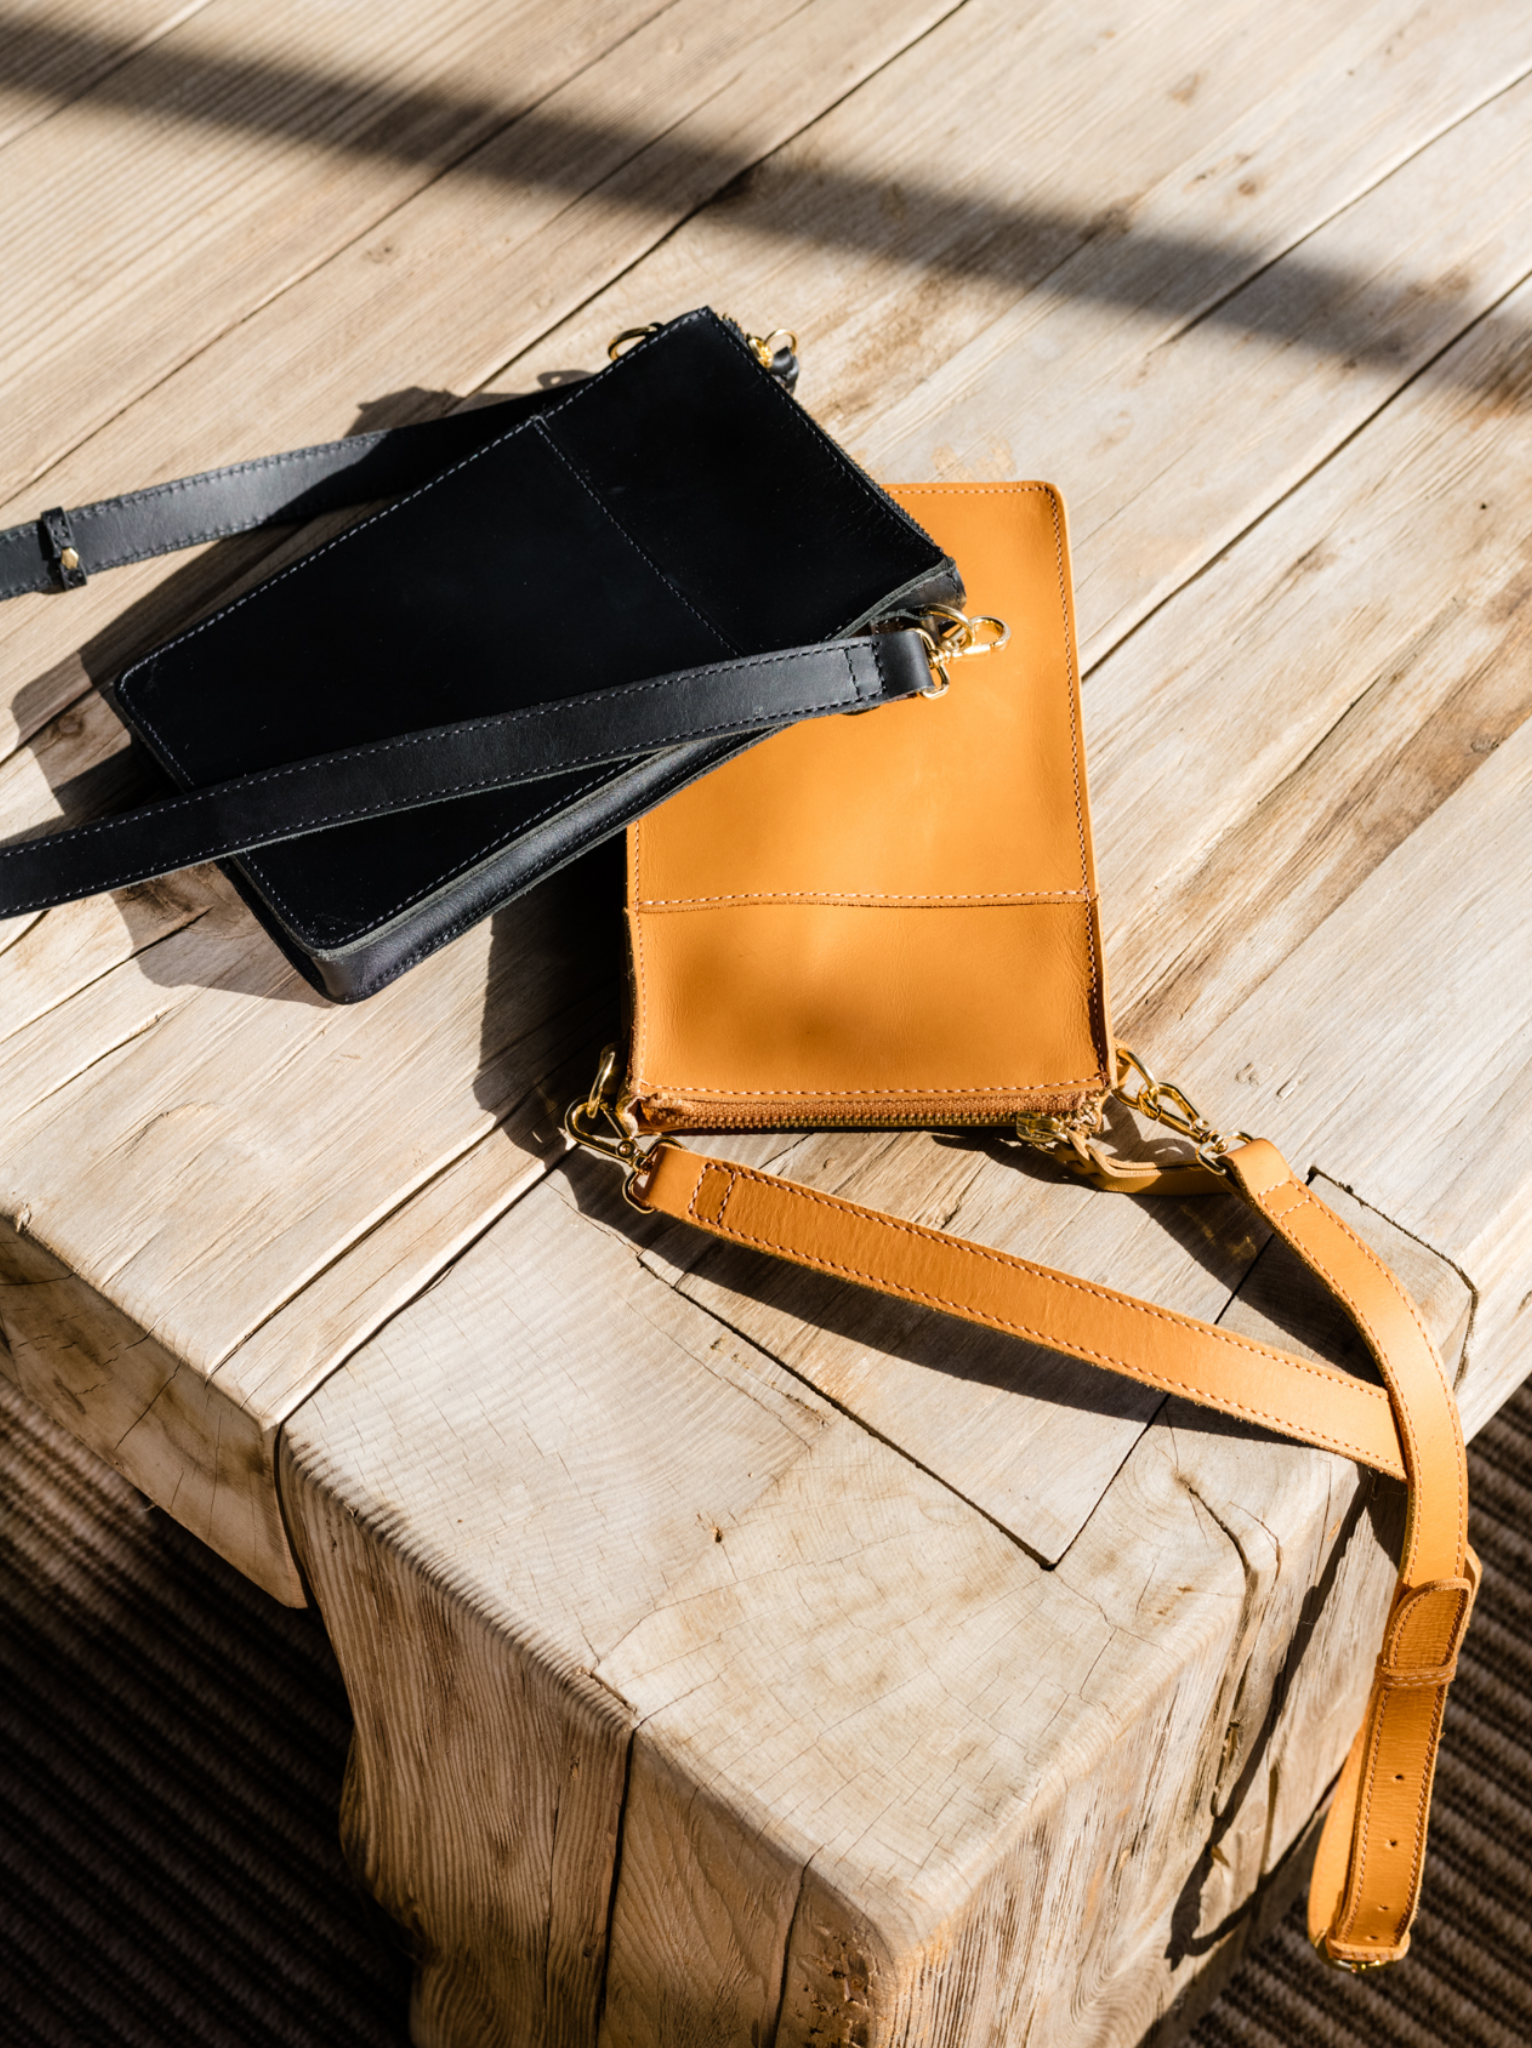 Two crossbody bags on a wooden stump in sunlight.